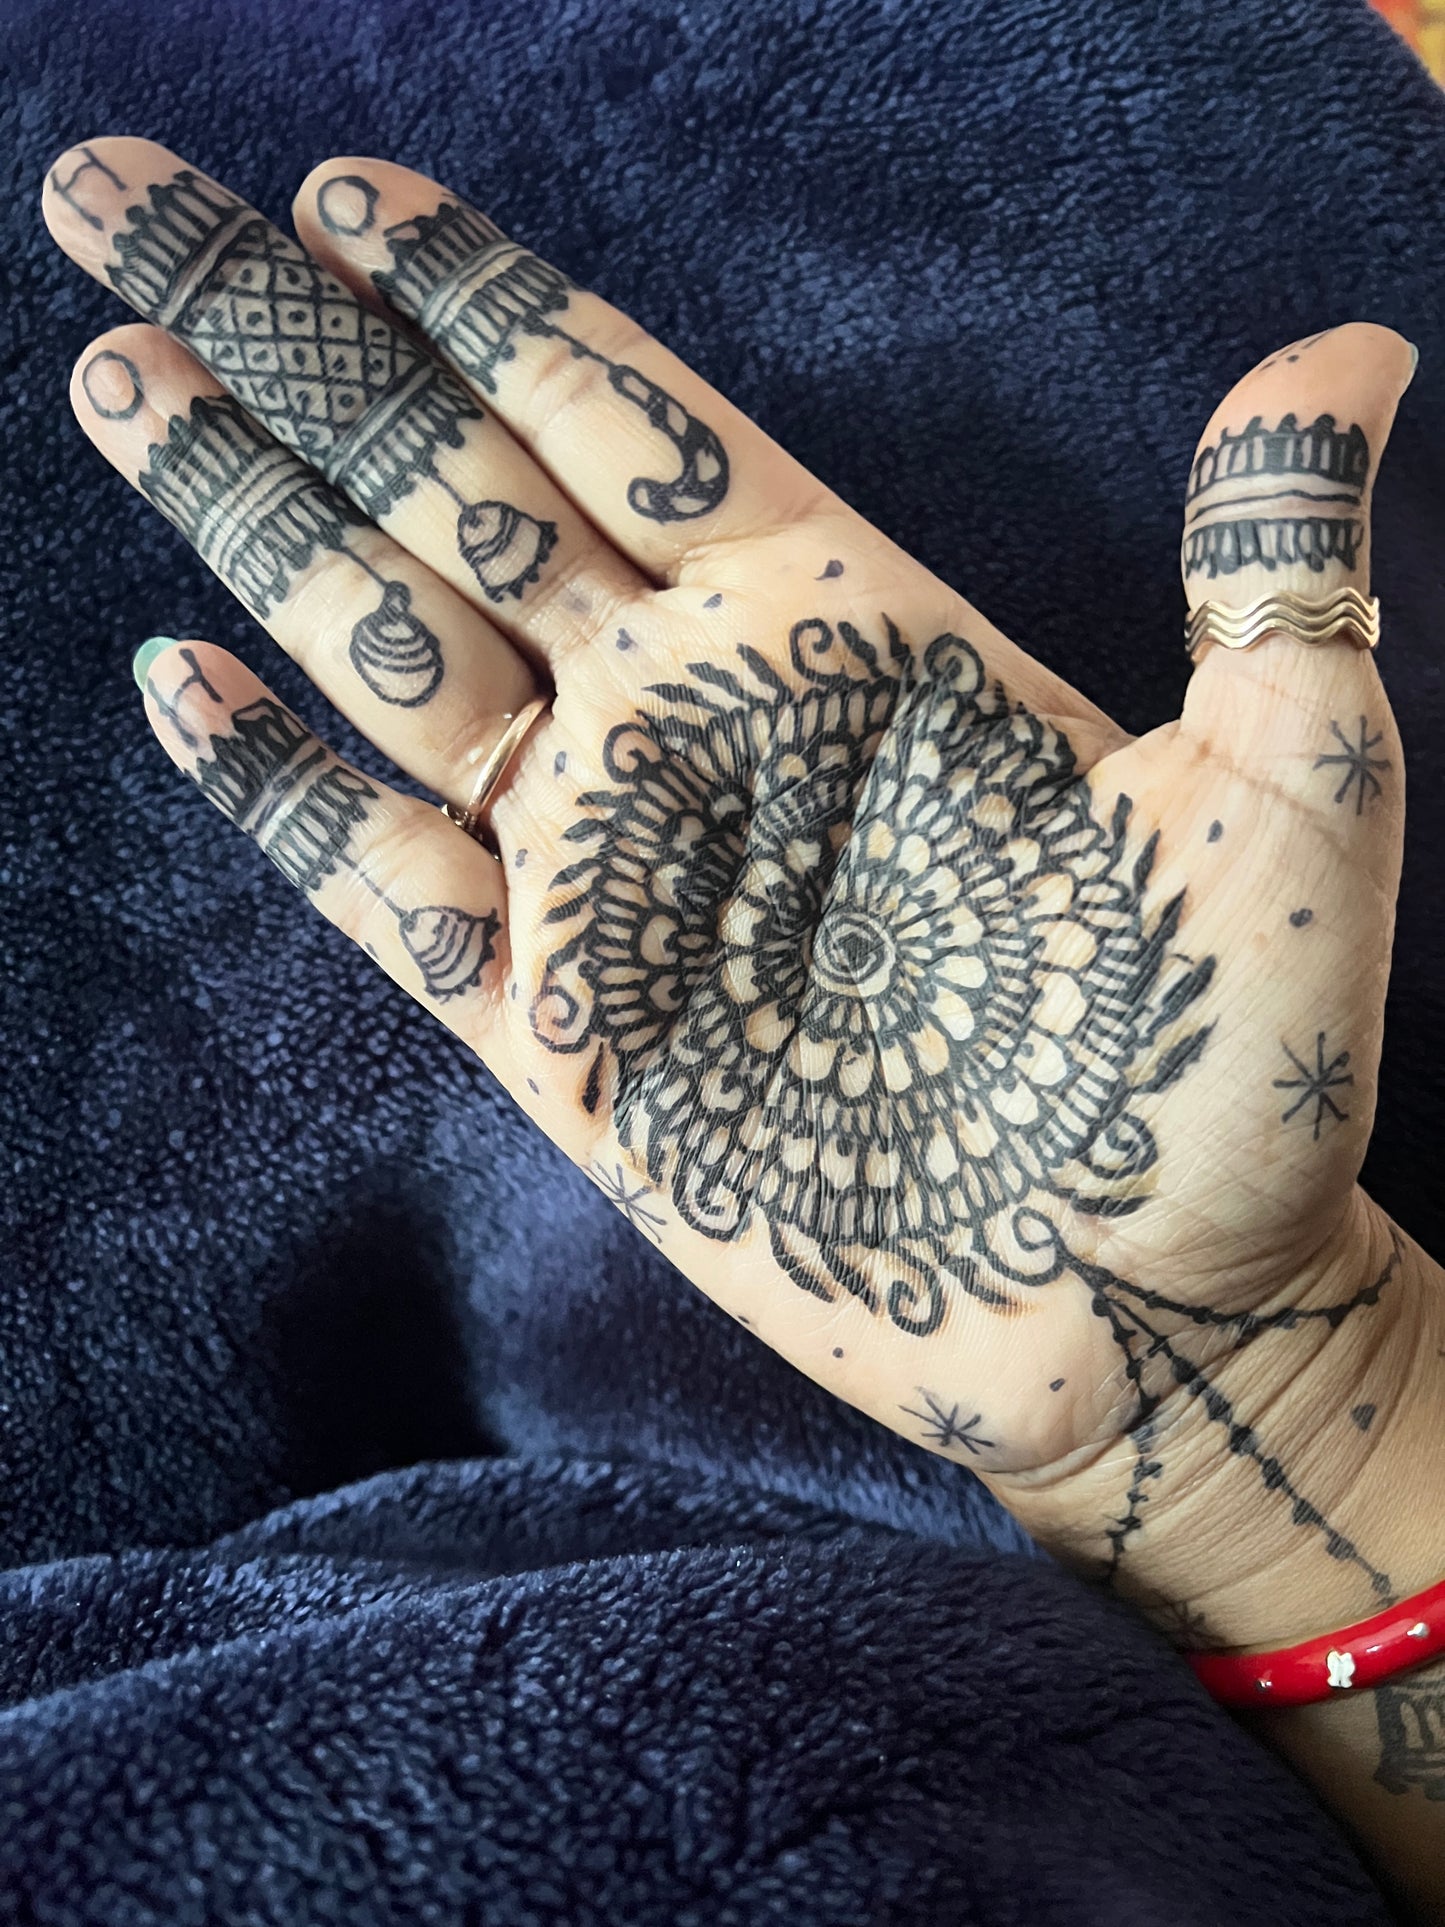 Jagua Gel Body Art, Ready to Use Cones, Naturally made